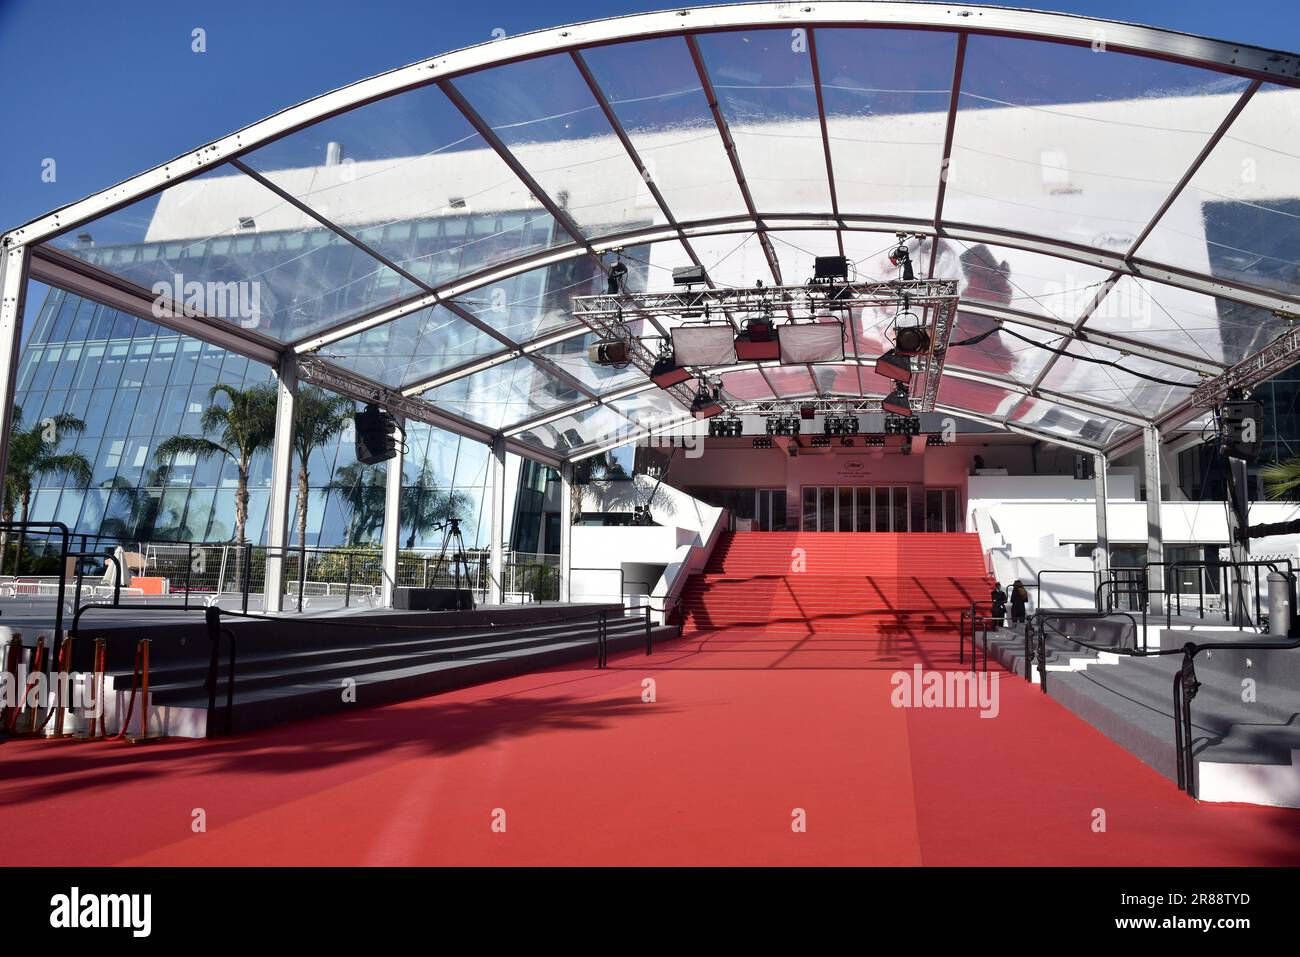 France, french riviera, Cannes, the stairs of the festival palace with the famous red carpet for the international film festival. Stock Photo